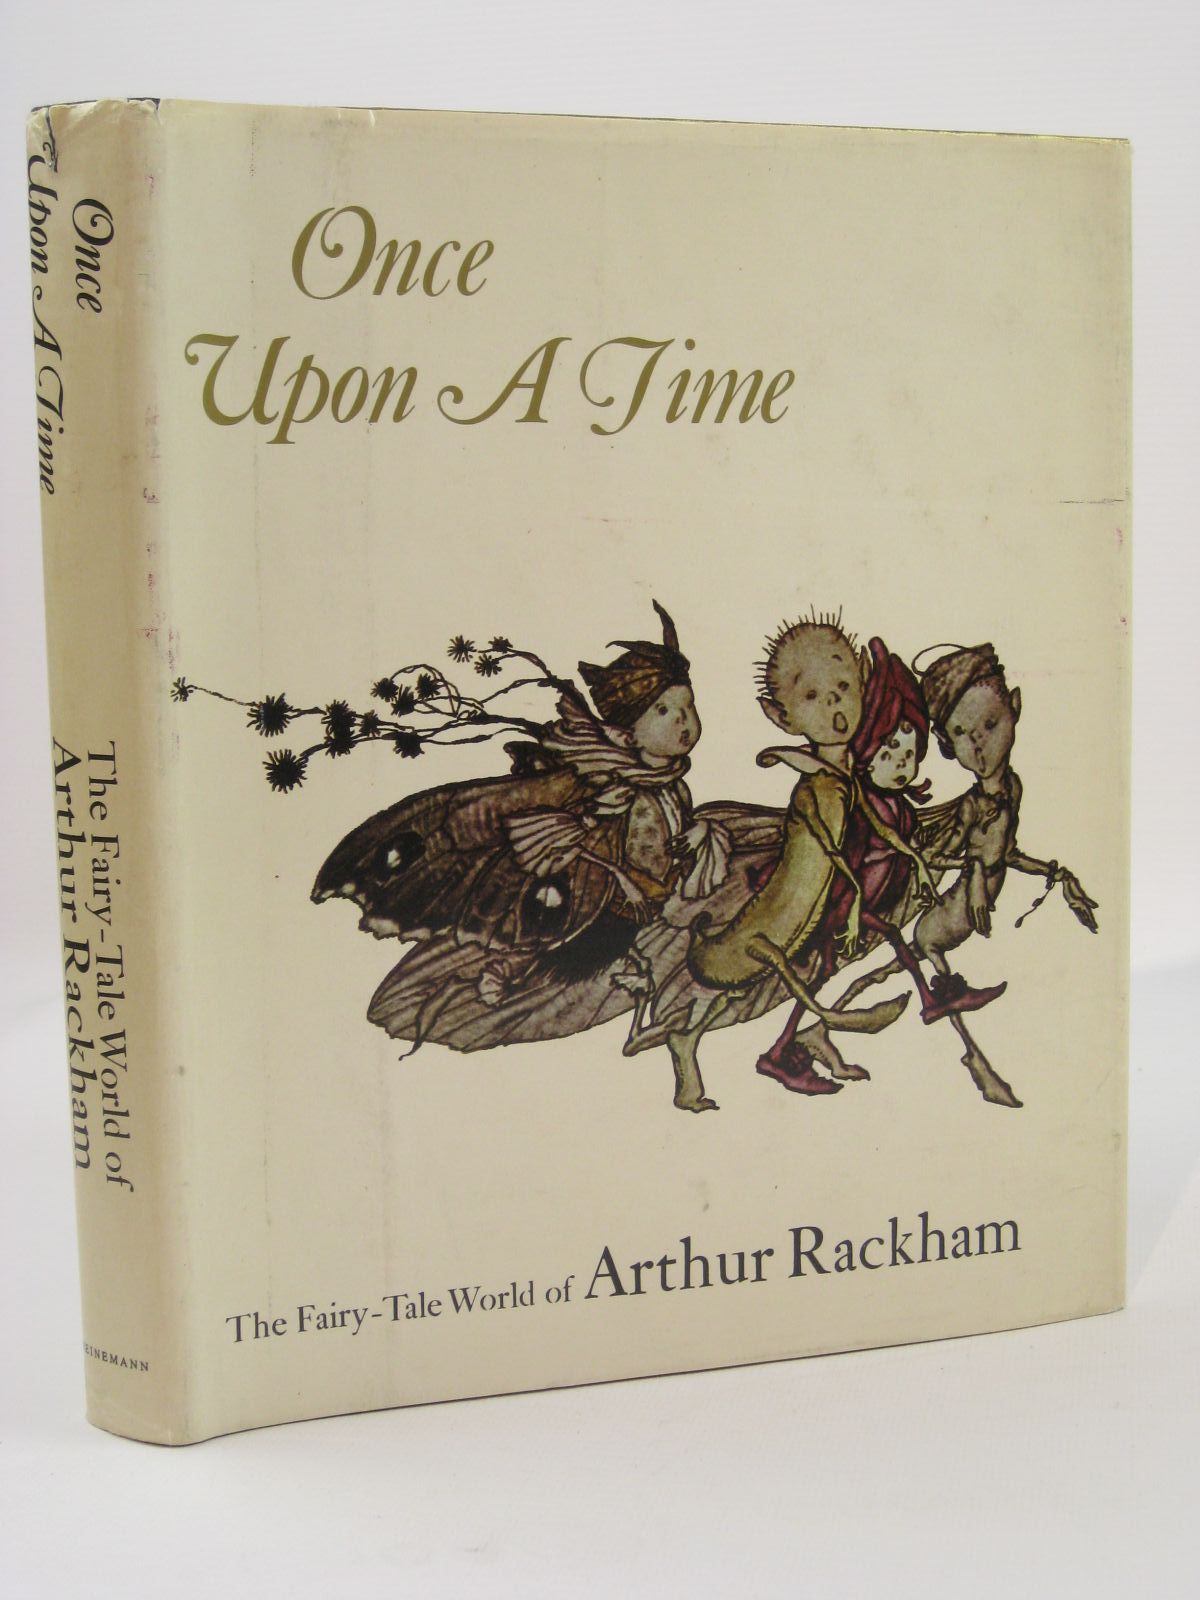 Cover of ONCE UPON A TIME THE FAIRY-TALE WORLD OF ARTHUR RACKHAM by Margery Darrell